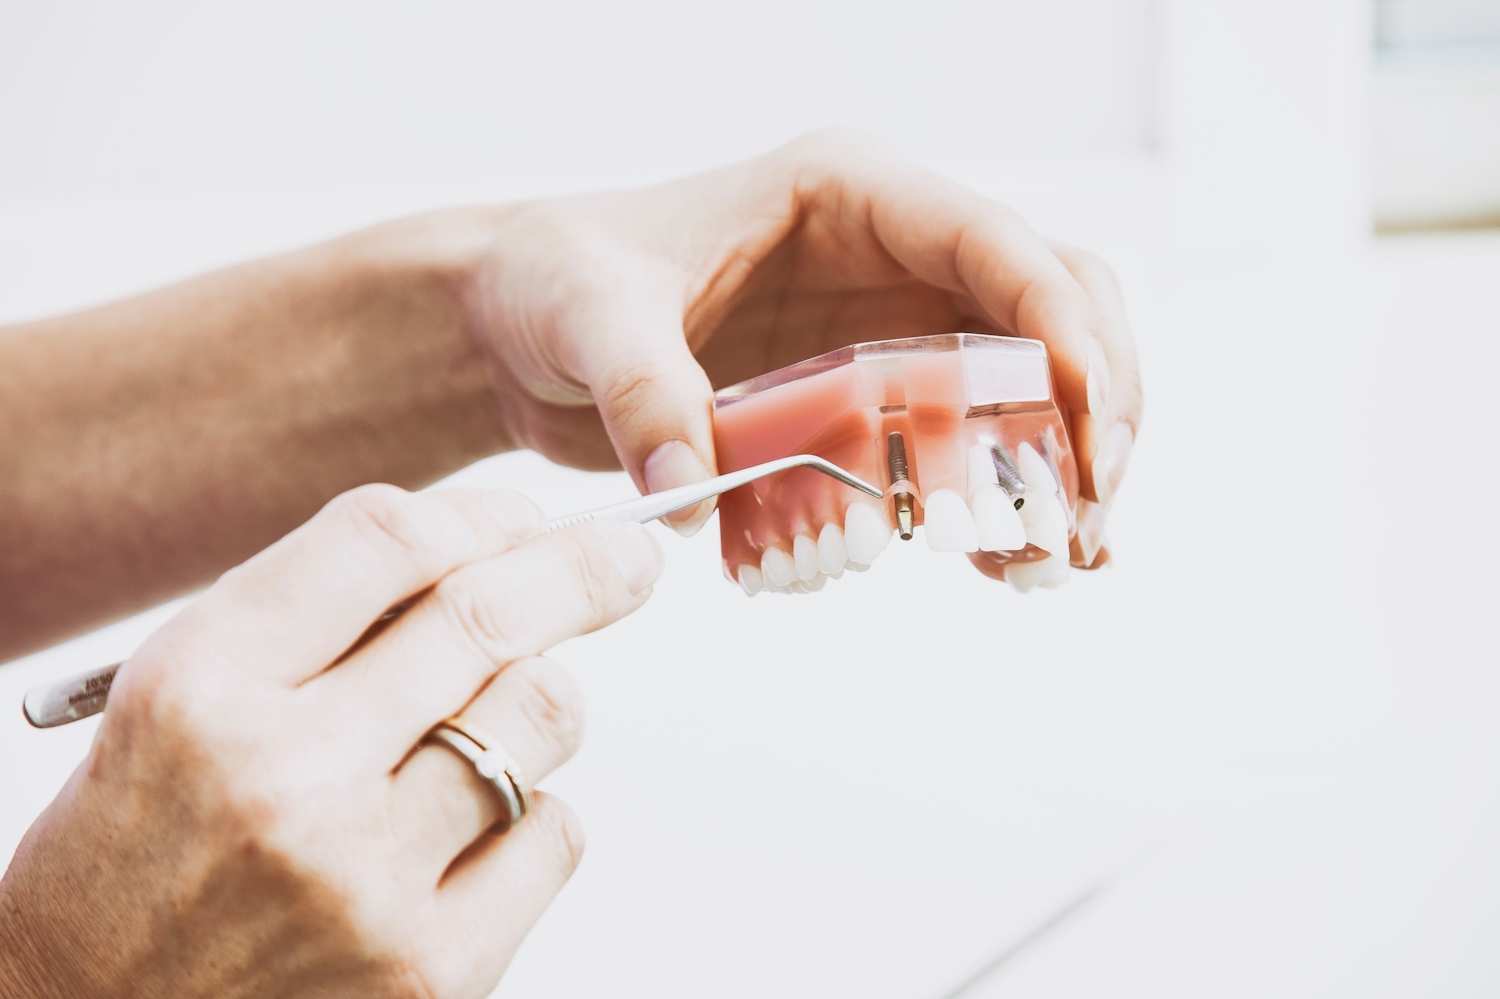 Cleaning dentures from orthodontist